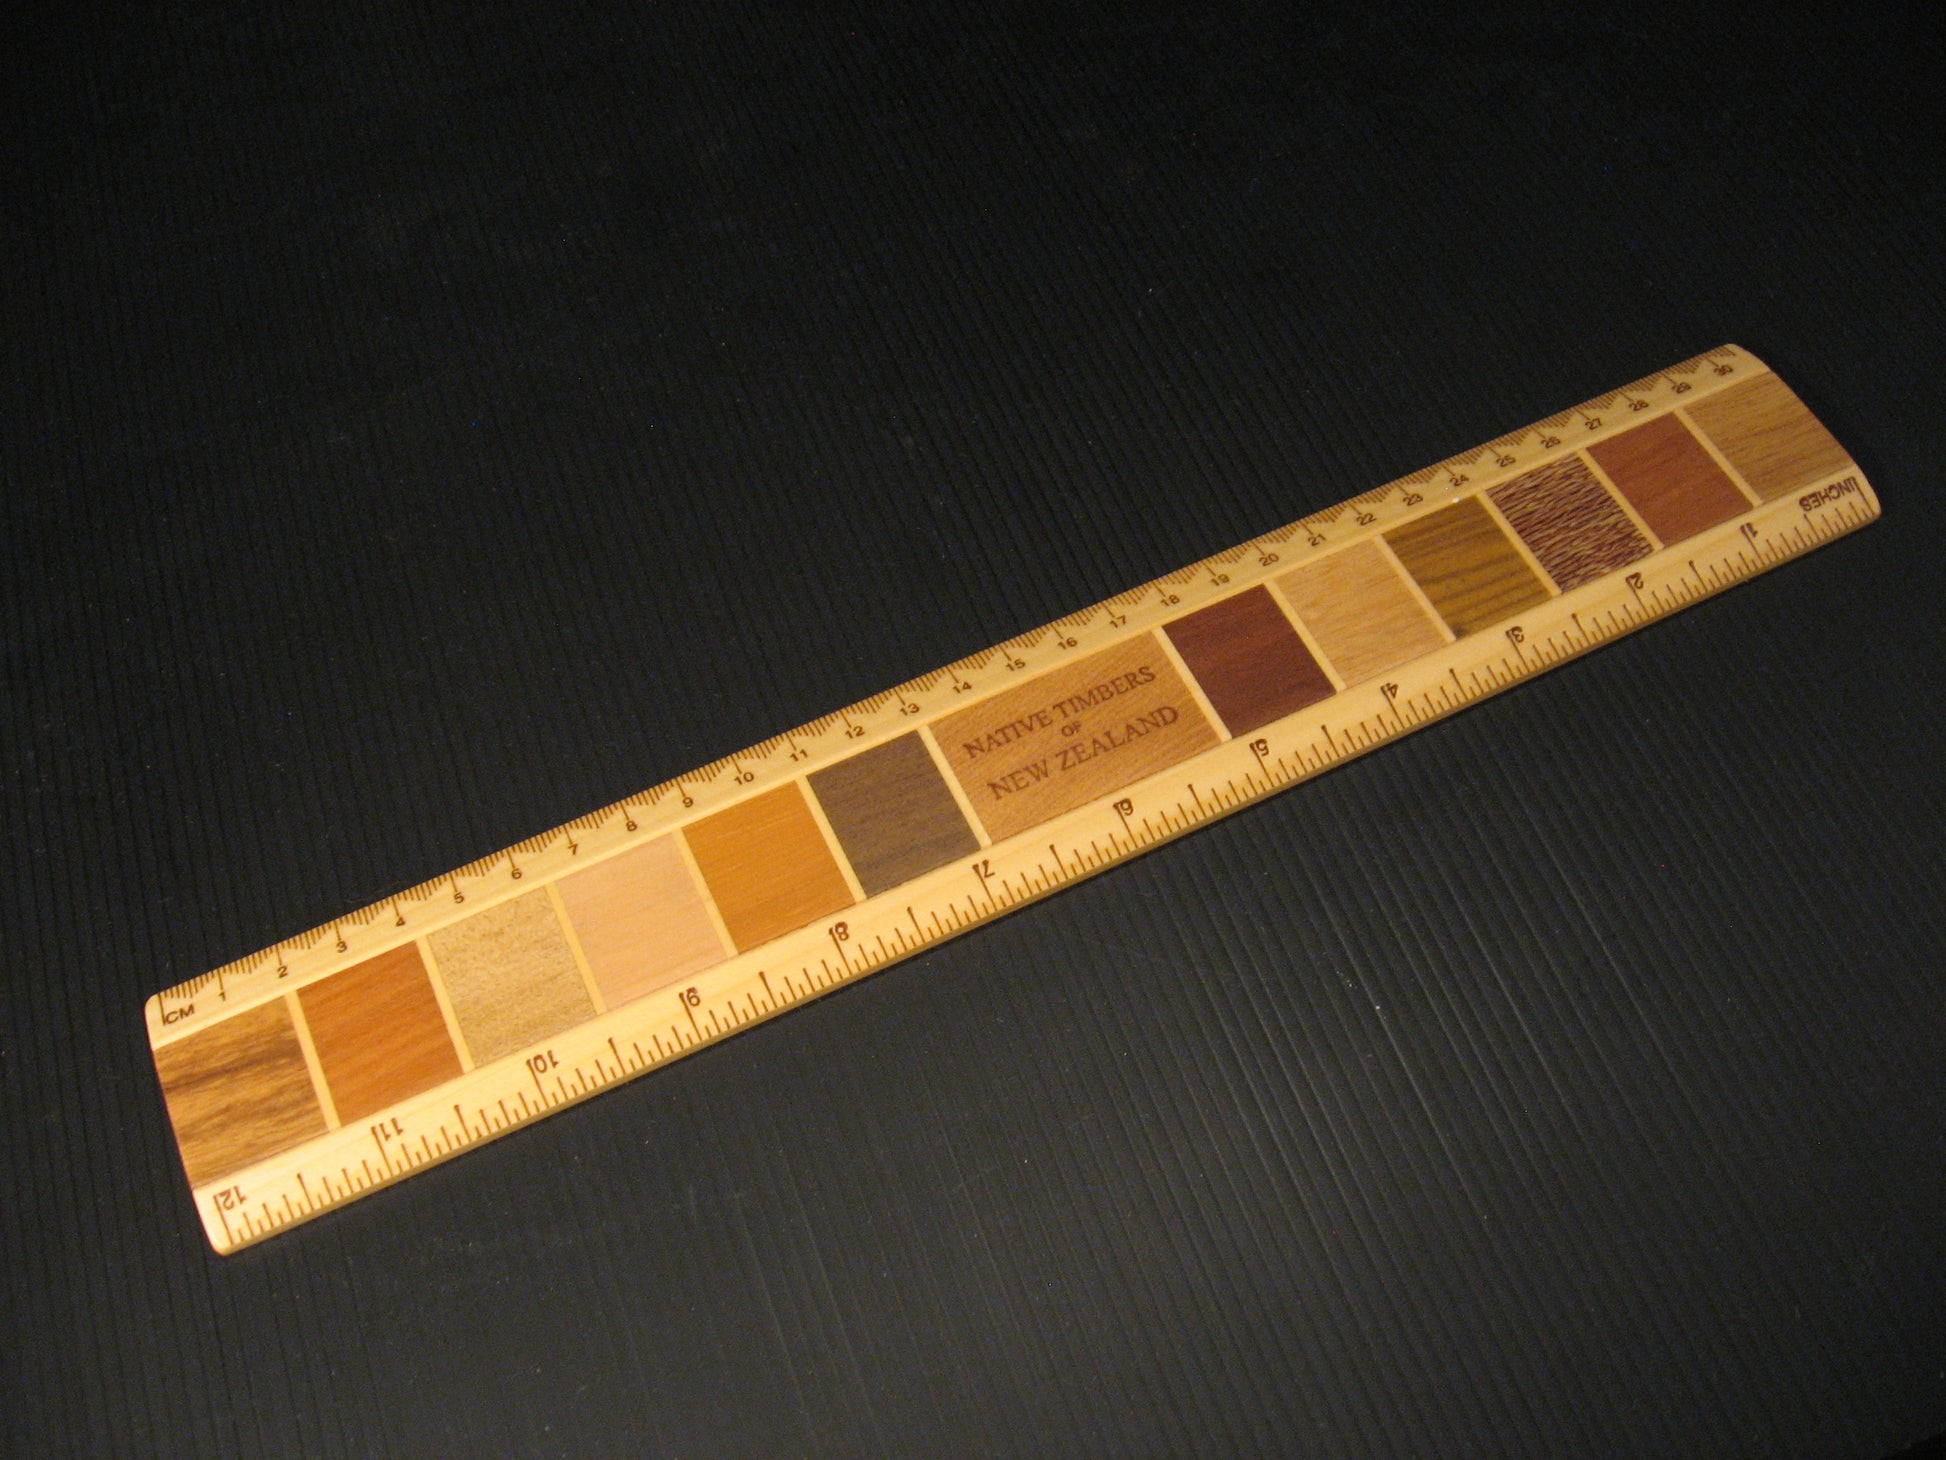 Ruler made from selected New Zealand Native Timbers by Timber Arts Silver Fern Gallery